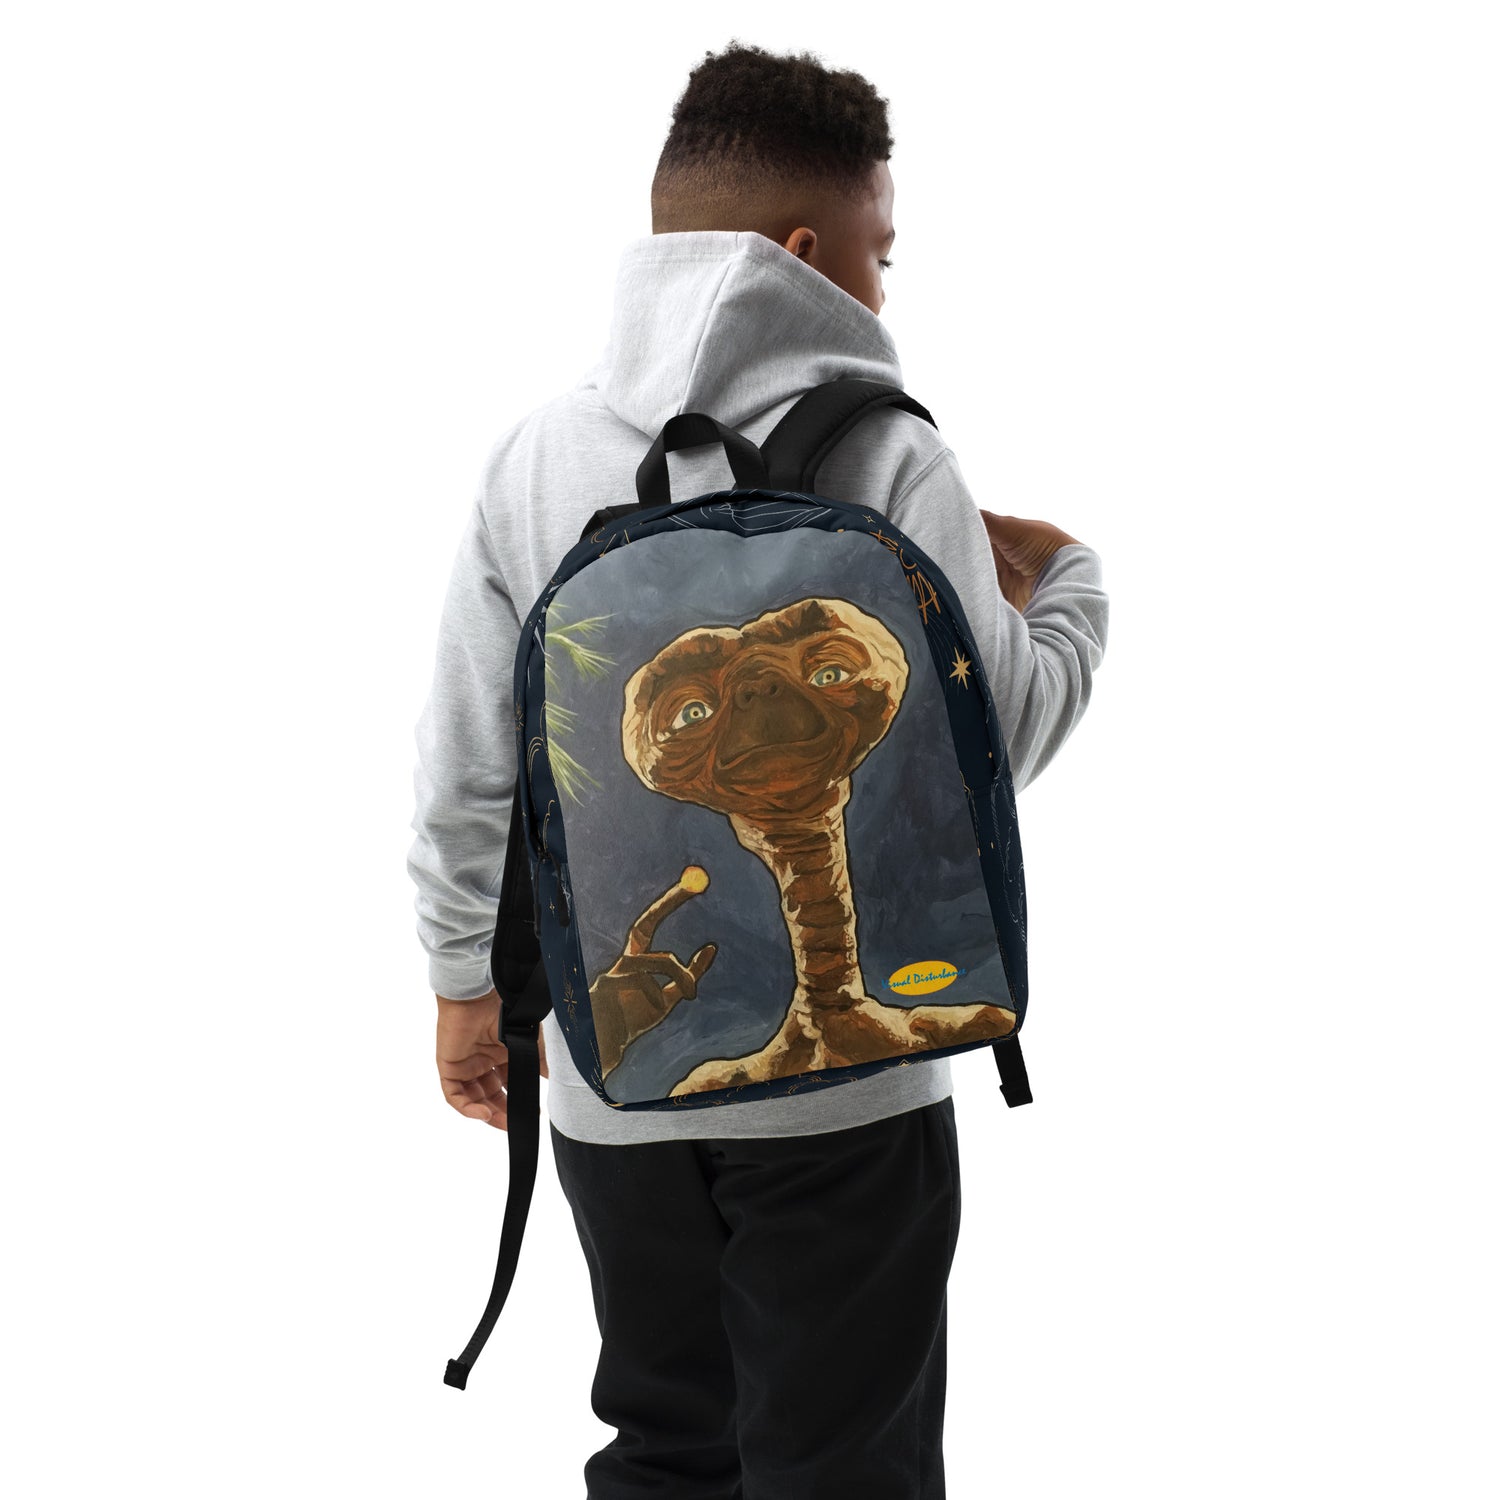 E.T. extra terrestrial backpack space print